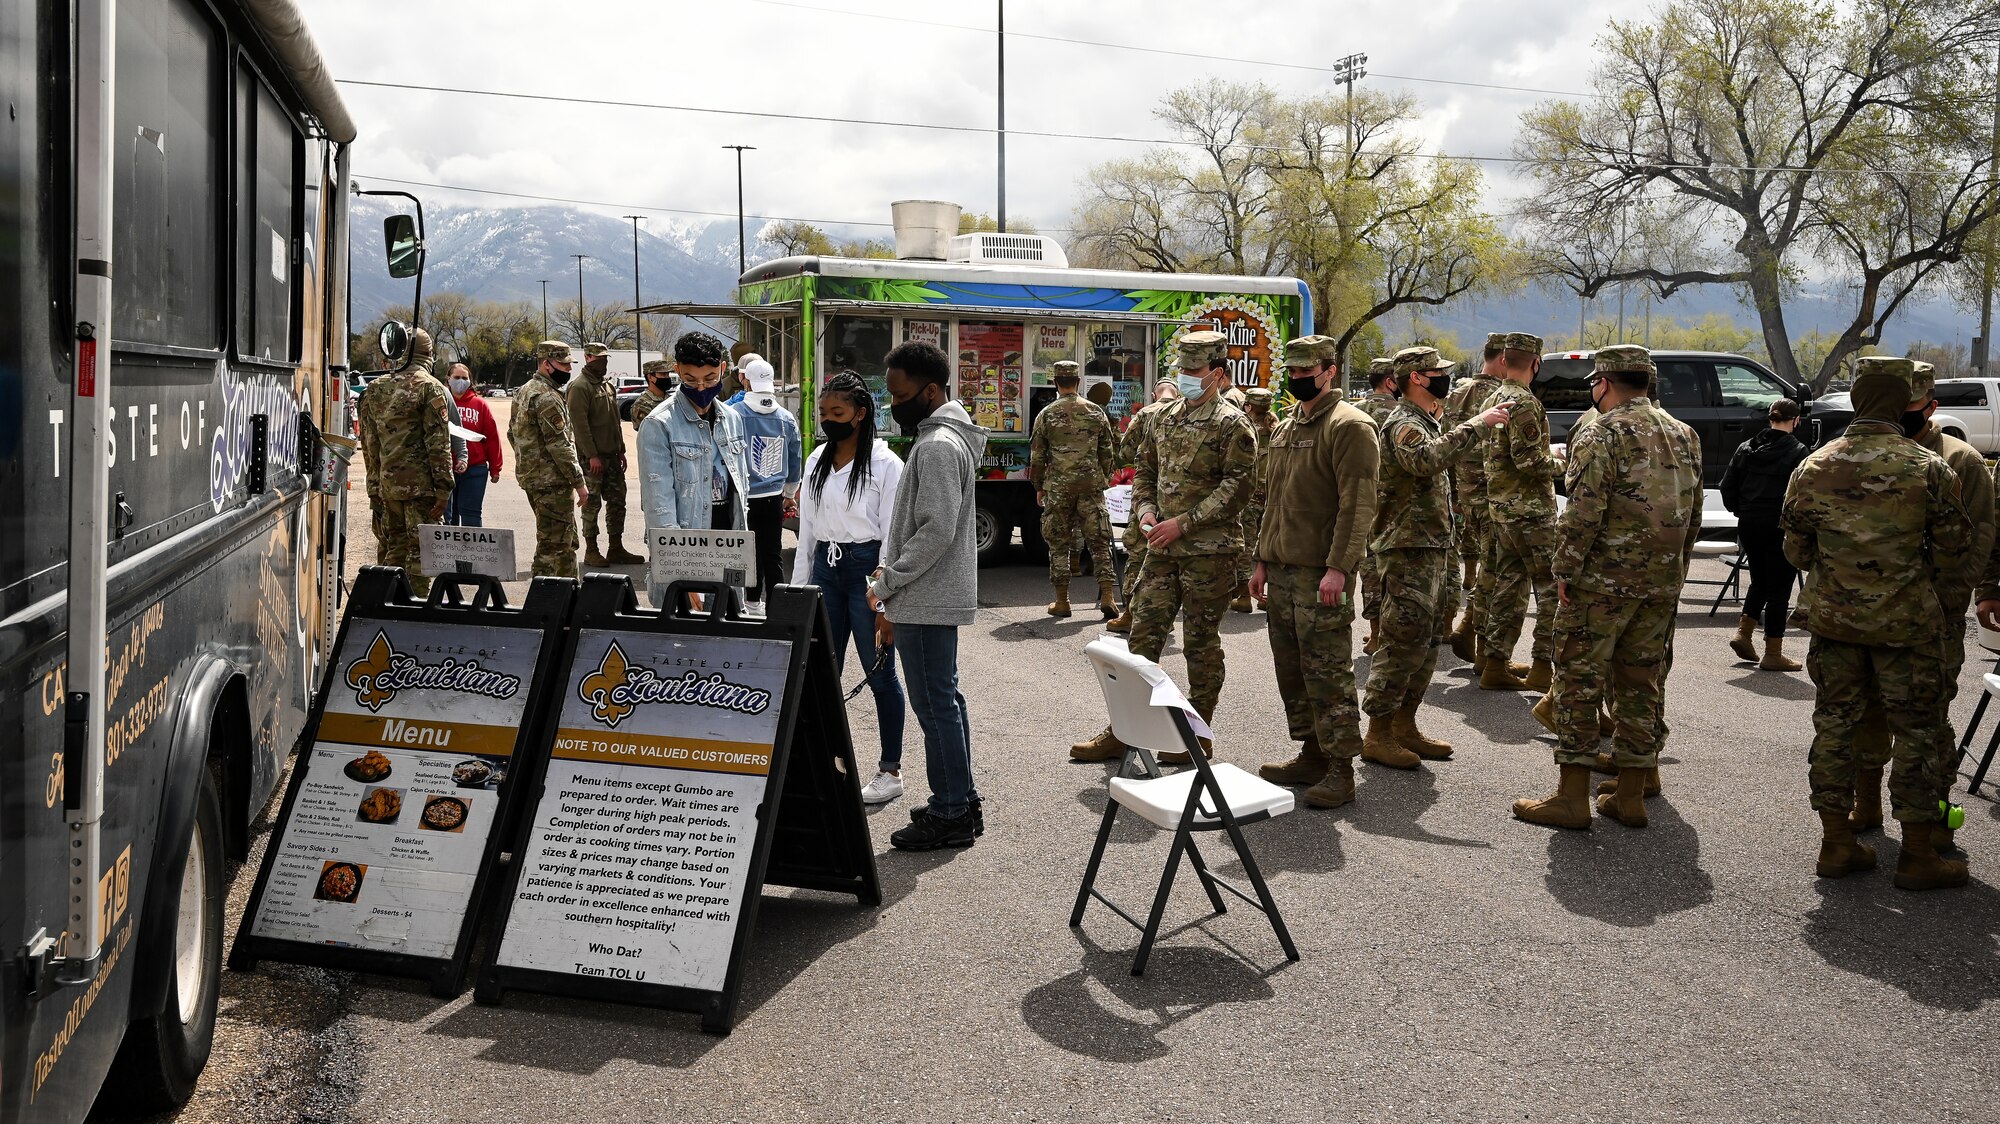 Airmen line up and order food.